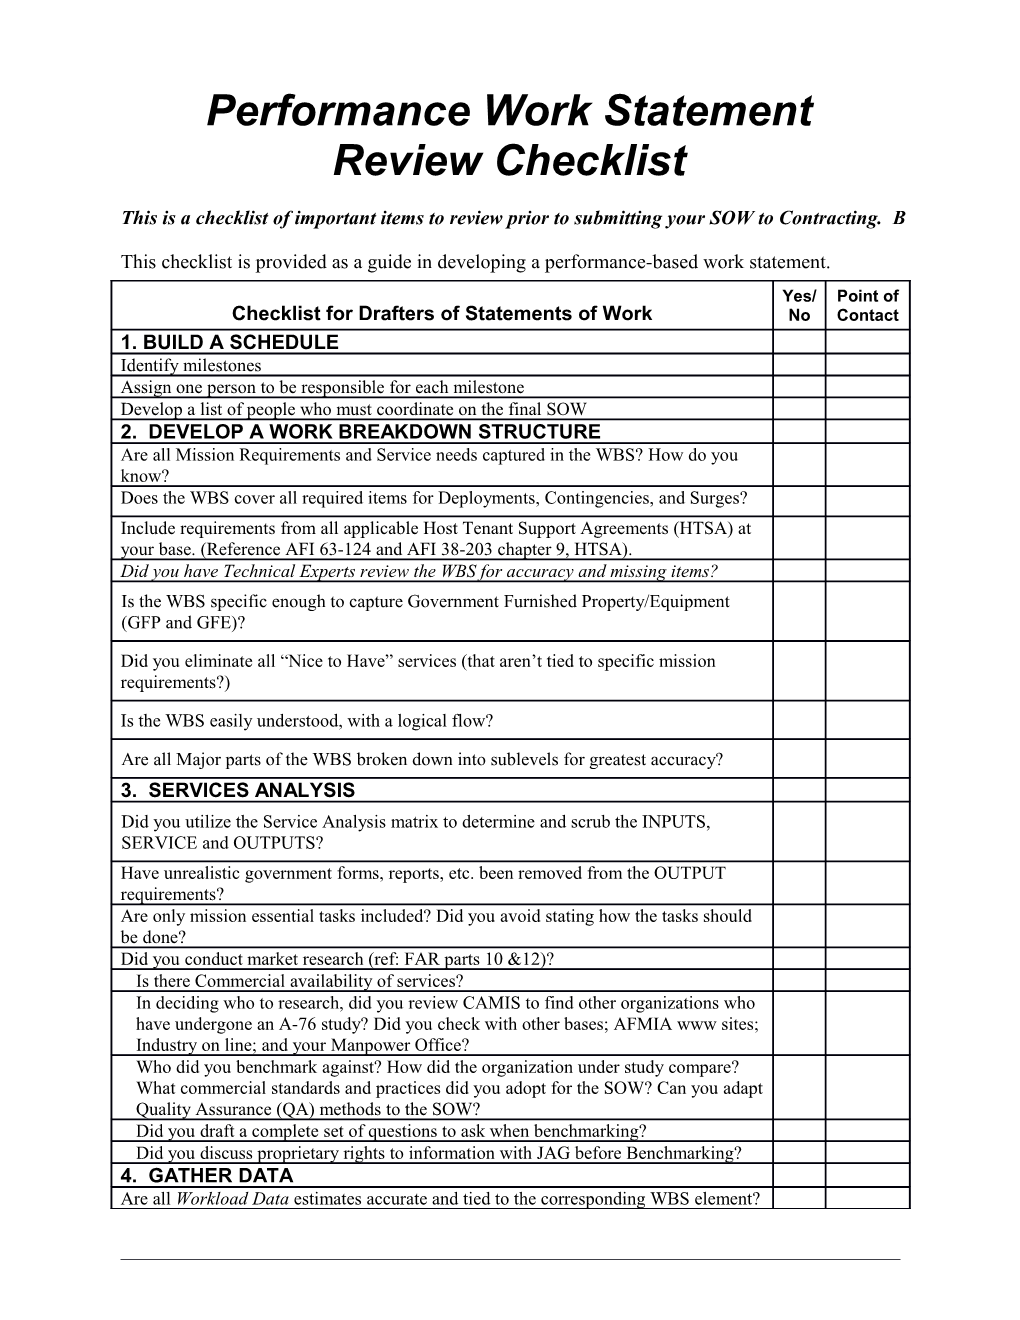 This Is a Checklist of Important Items to Review Prior to Submitting Your SOW to Contracting